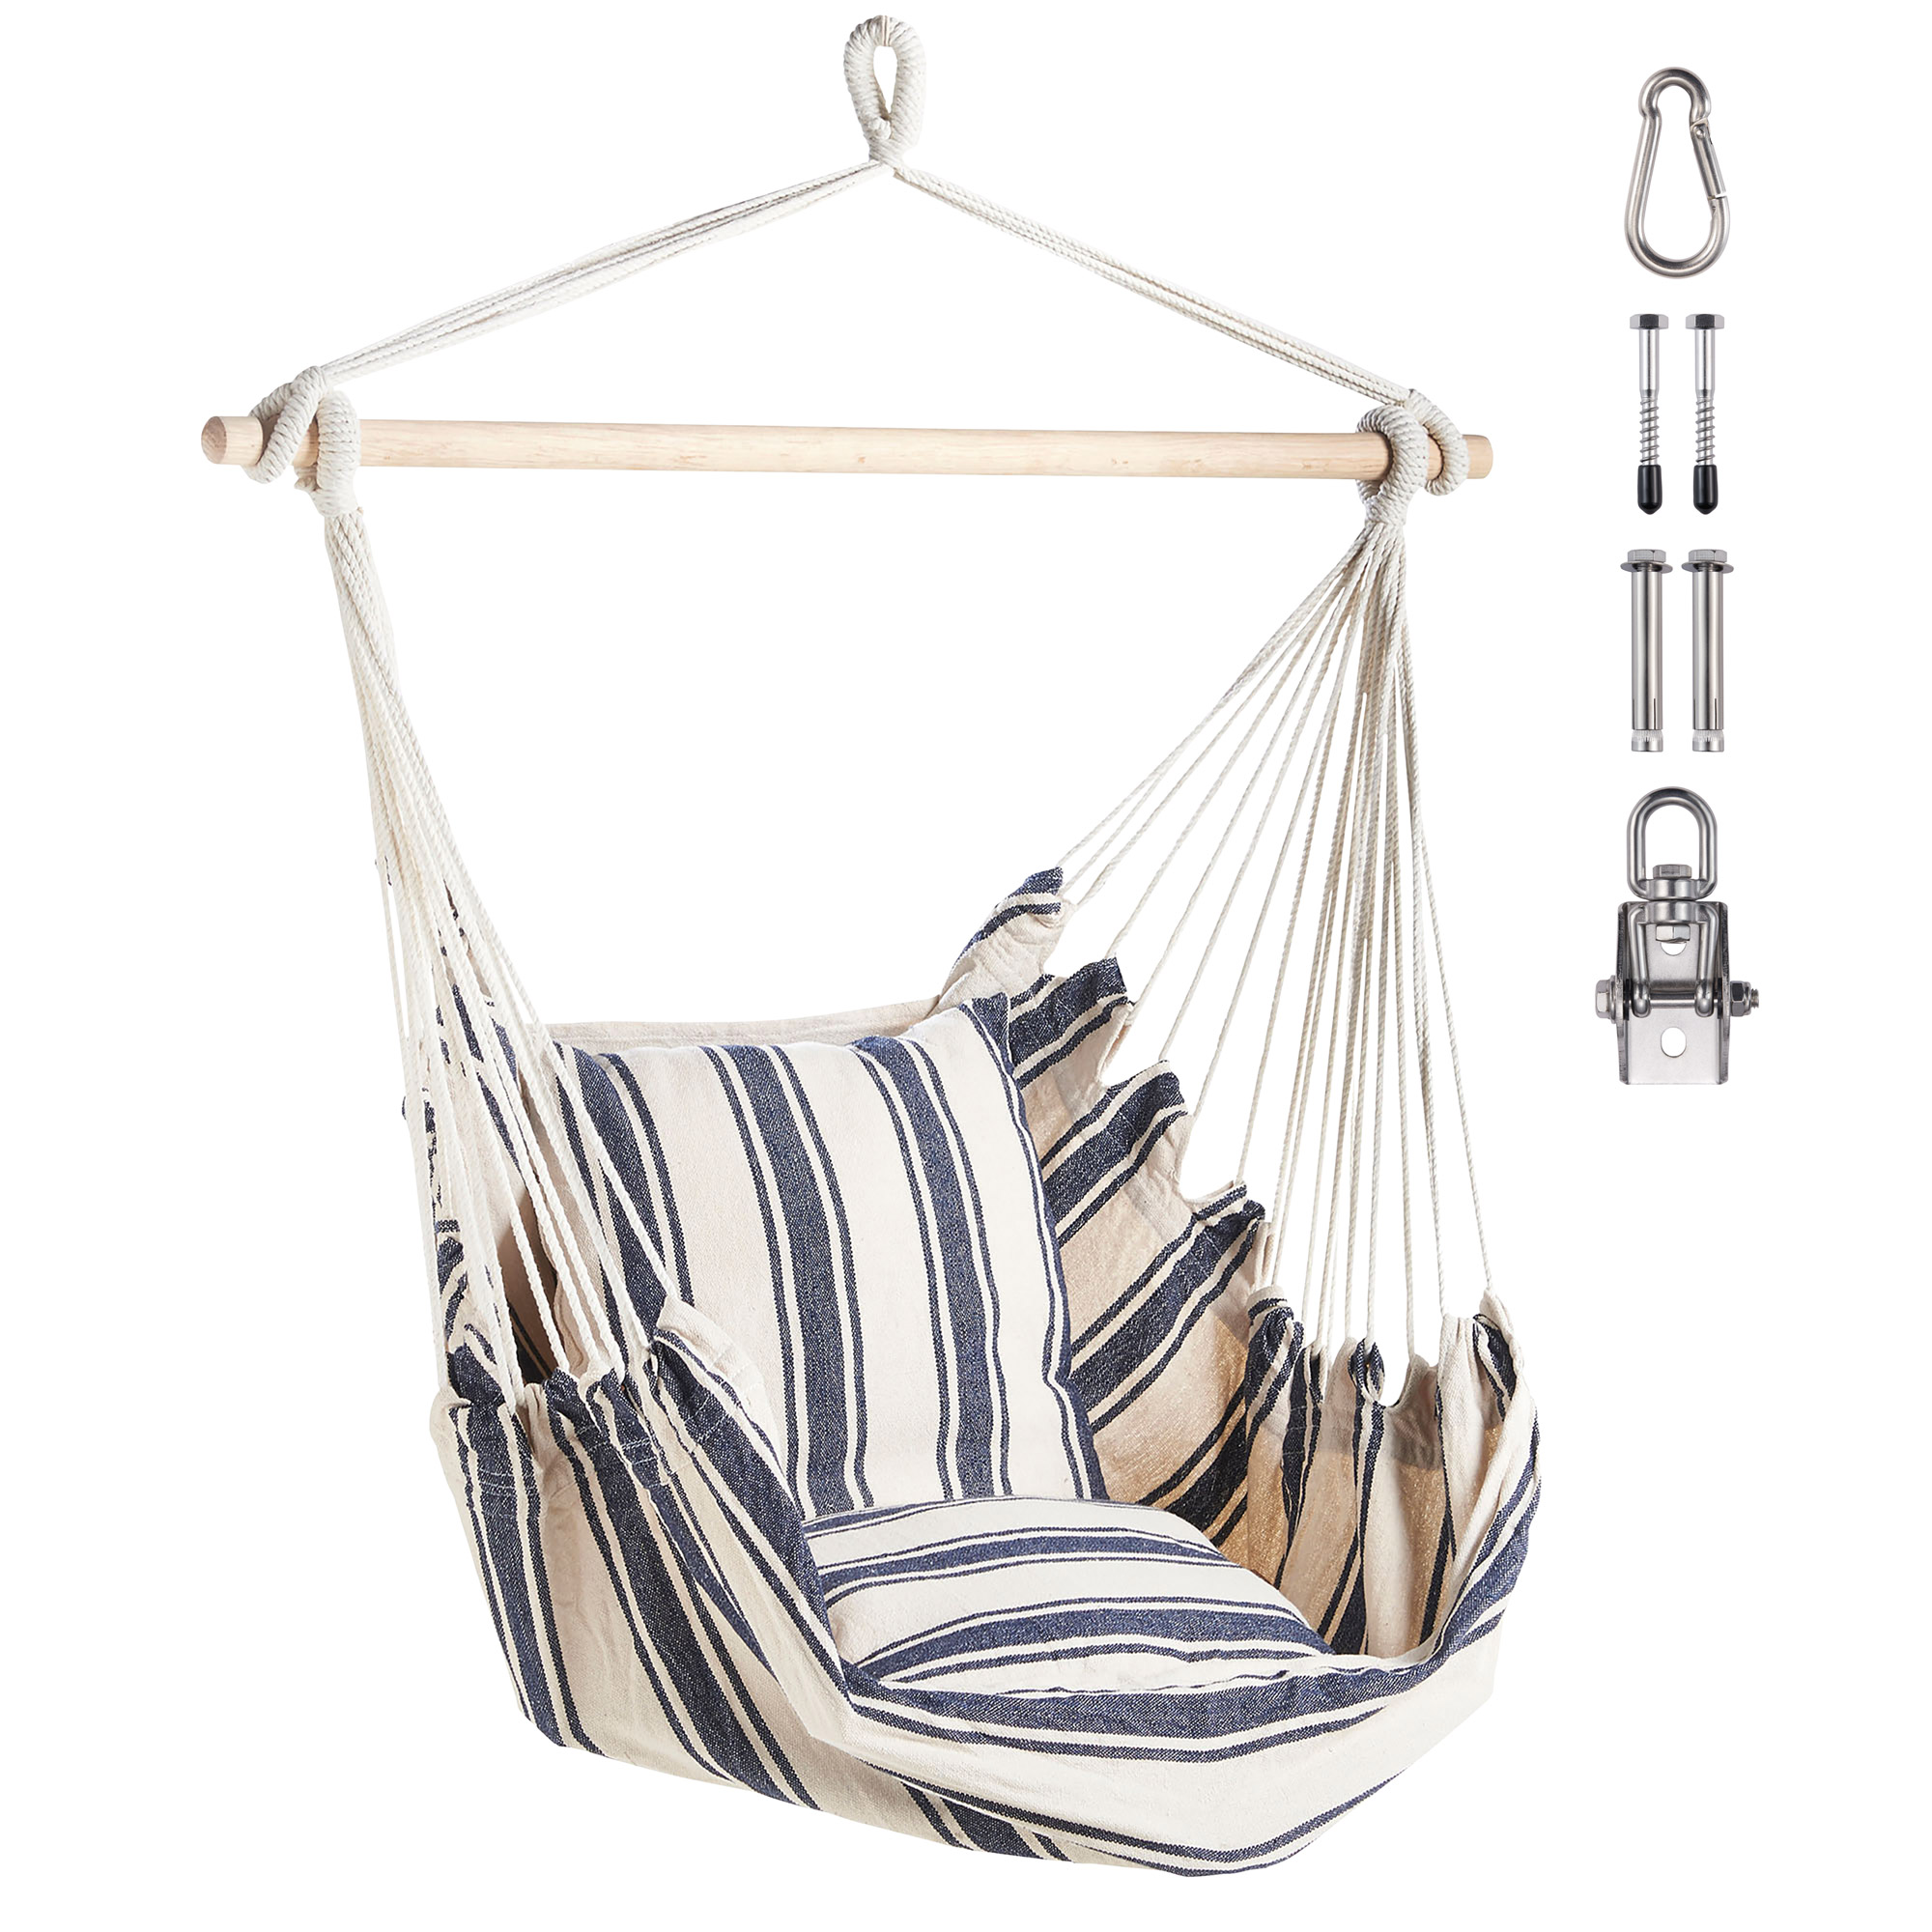 VonHaus Striped Hanging Chair - 100% cotton Outdoor Swinging Cloth with Cushioned Seat & Attachments